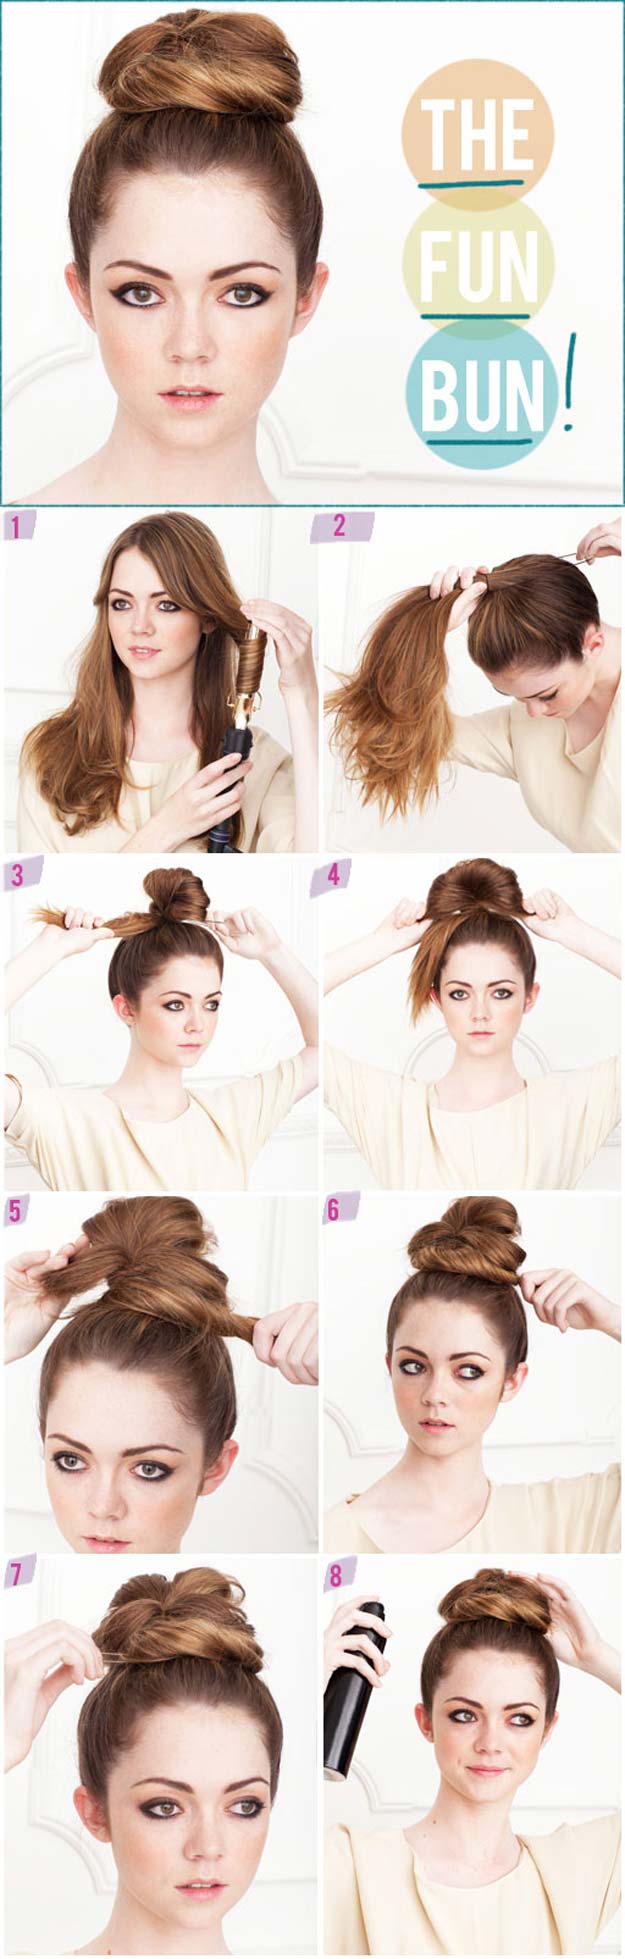 Best Hairstyles for Long Hair - Fun Bun- Step by Step Tutorials for Easy Curls, Updo, Half Up, Braids and Lazy Girl Looks. Prom Ideas, Special Occasion Hair and Braiding Instructions for Teens, Teenagers and Adults, Women and Girls 